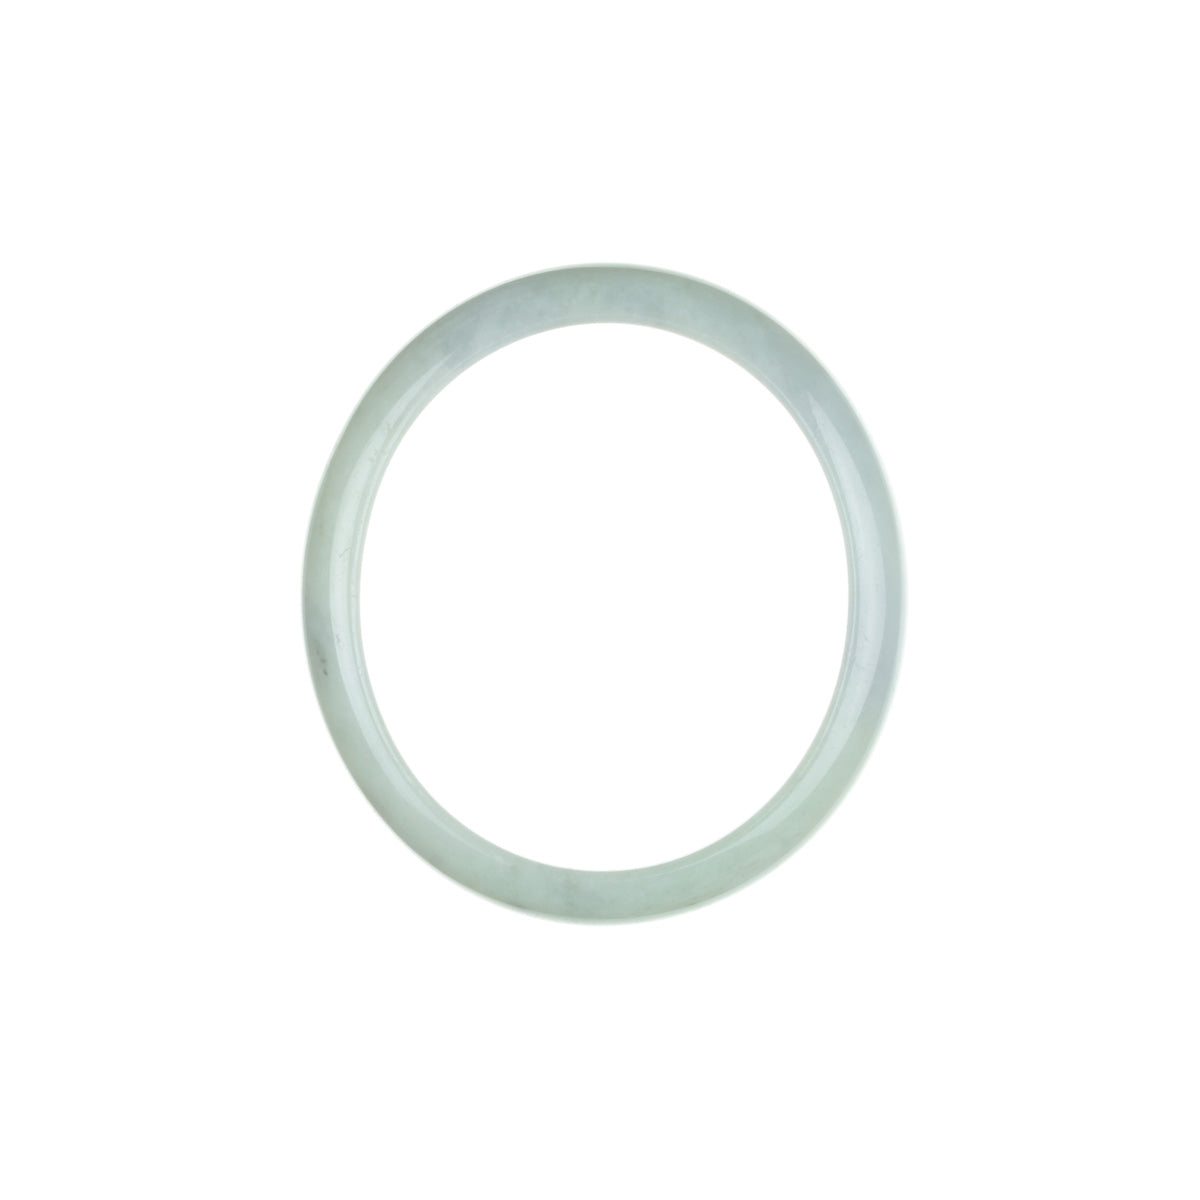 Real Grade A Pale Green with hints of Lavender Jade Bangle Bracelet - 56mm Oval